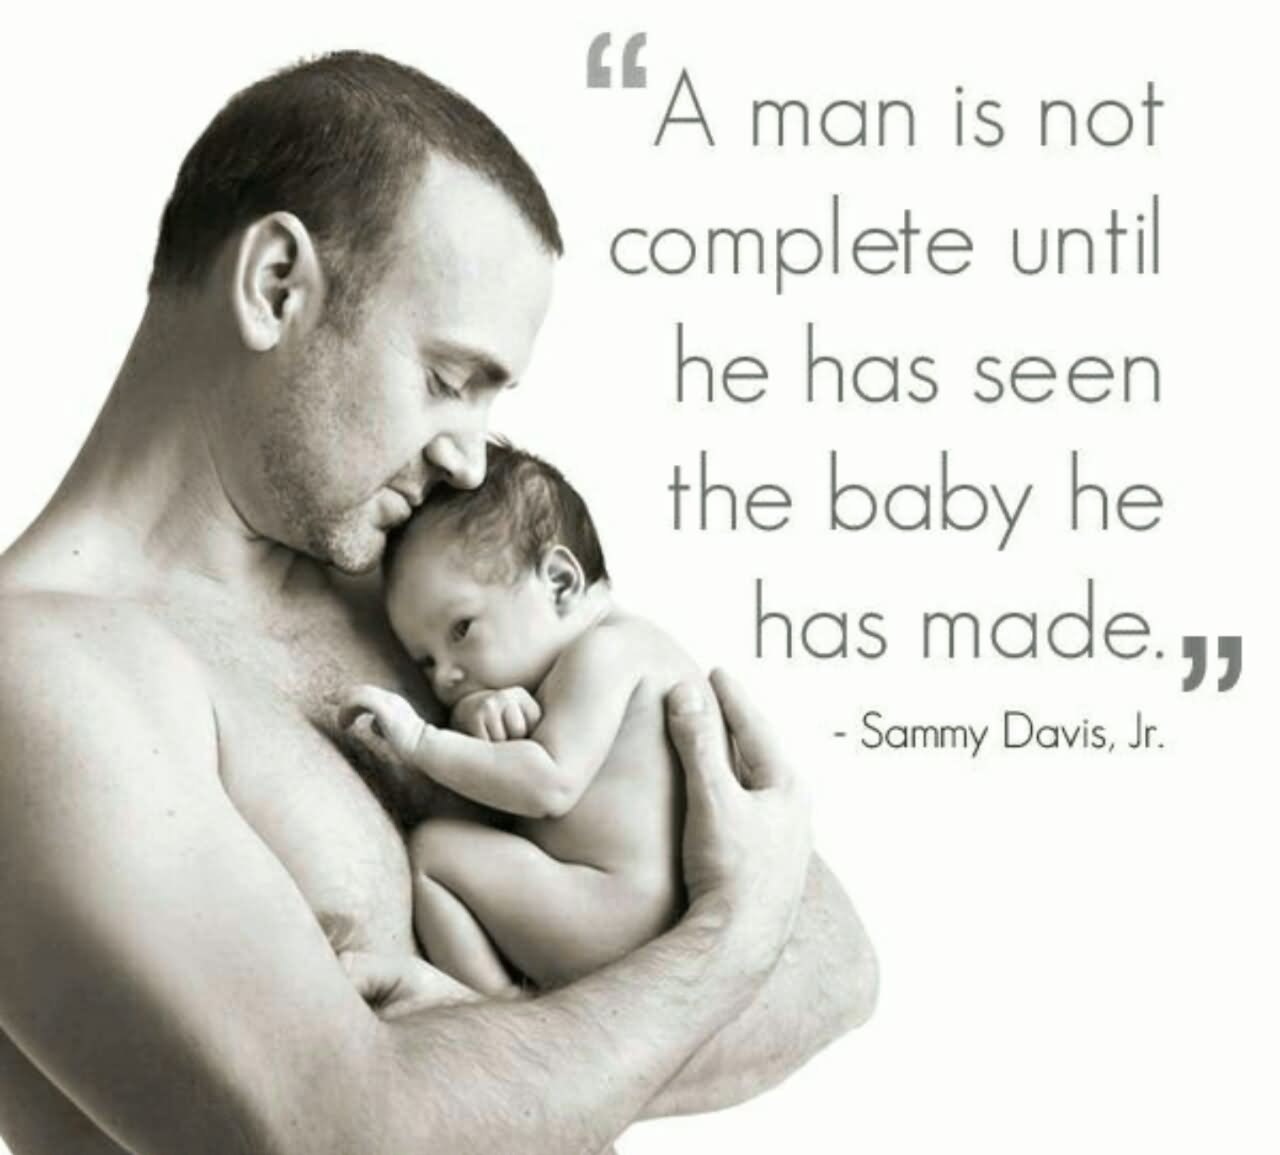 A man is not complete until he has seen the baby he has made. - Sammy Davis, Jr